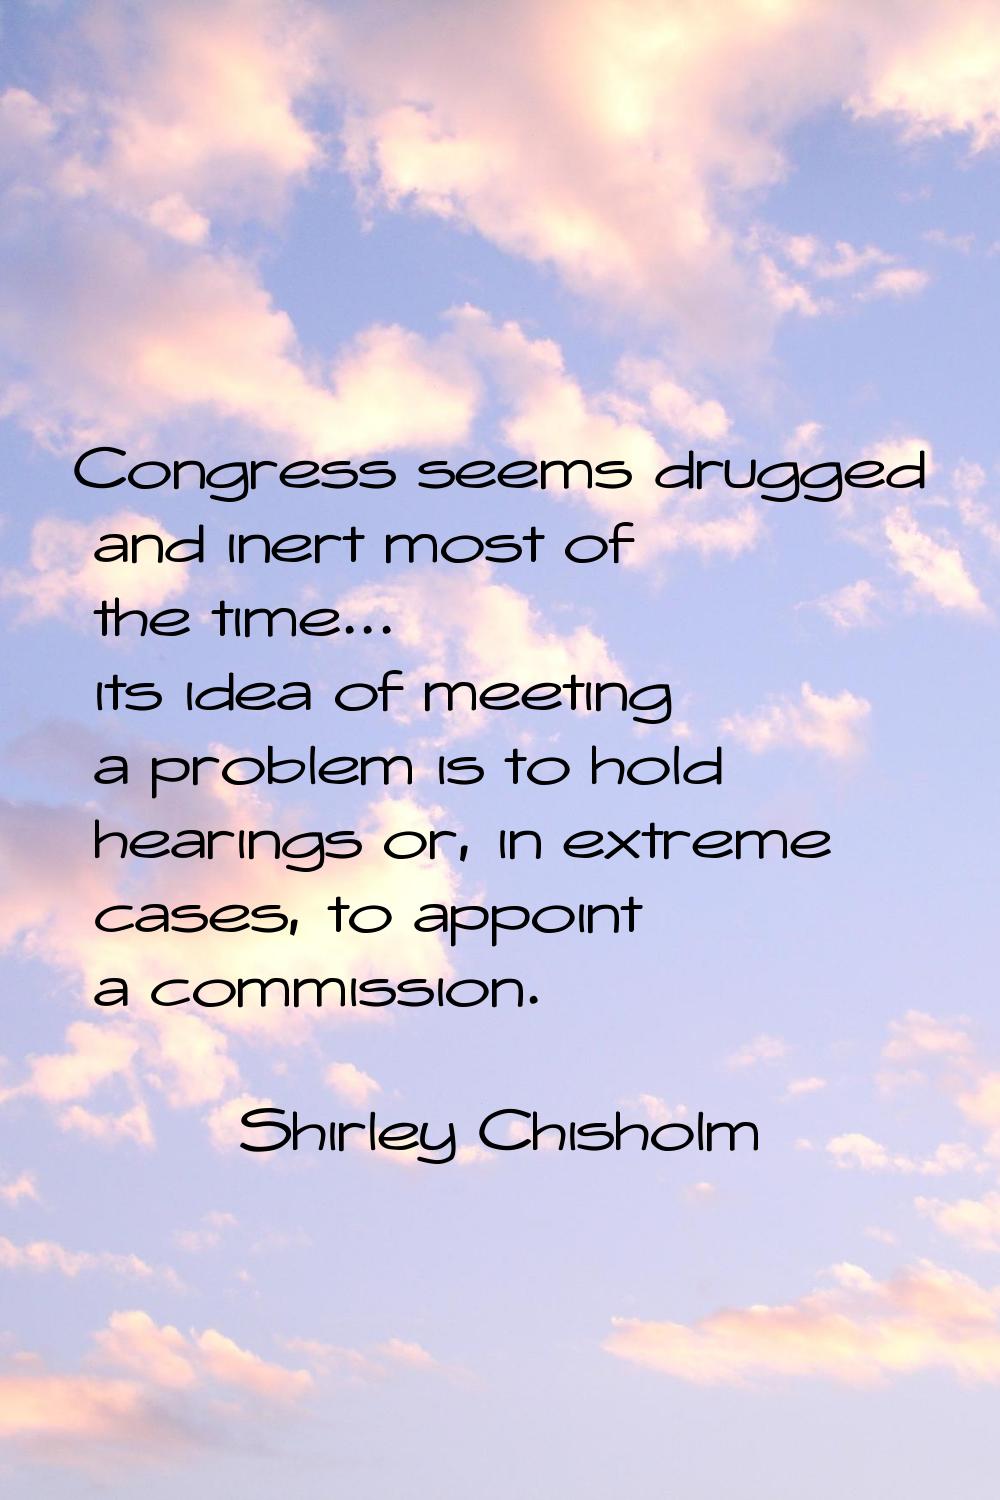 Congress seems drugged and inert most of the time... its idea of meeting a problem is to hold heari